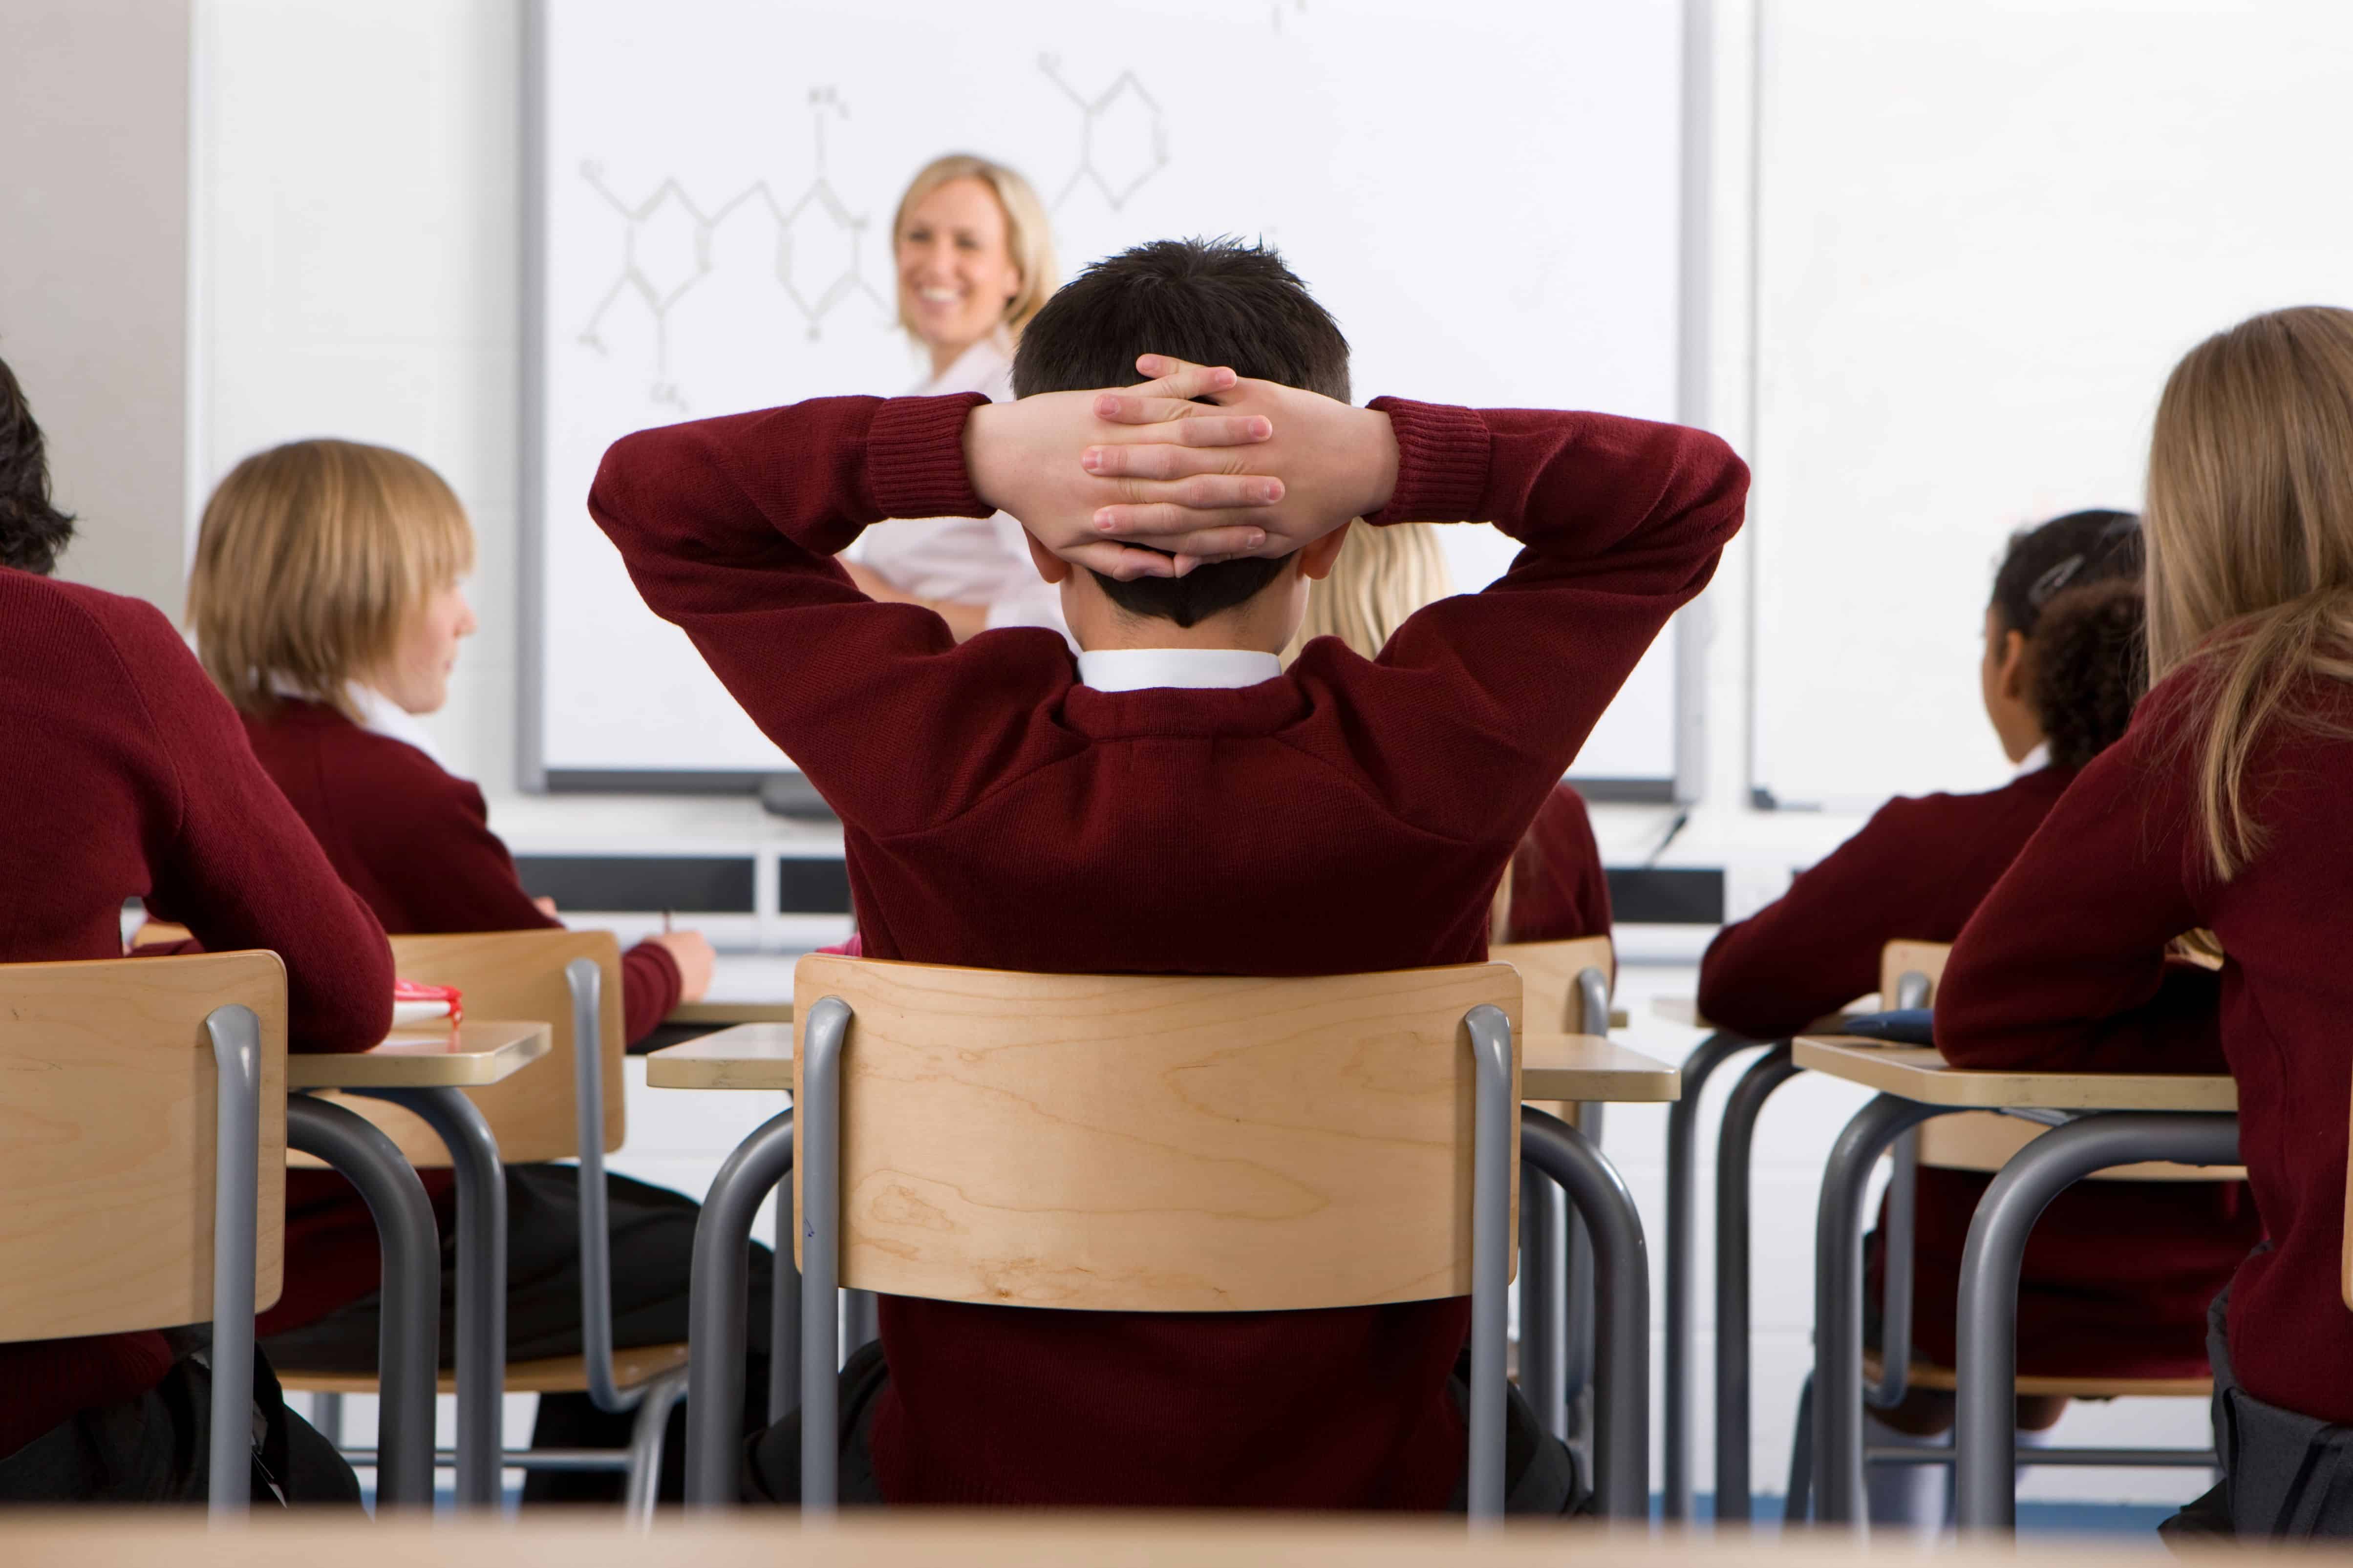 Rear view of a school boy with his hands behind head while listening to the subject being taught by the teacher in a classroom